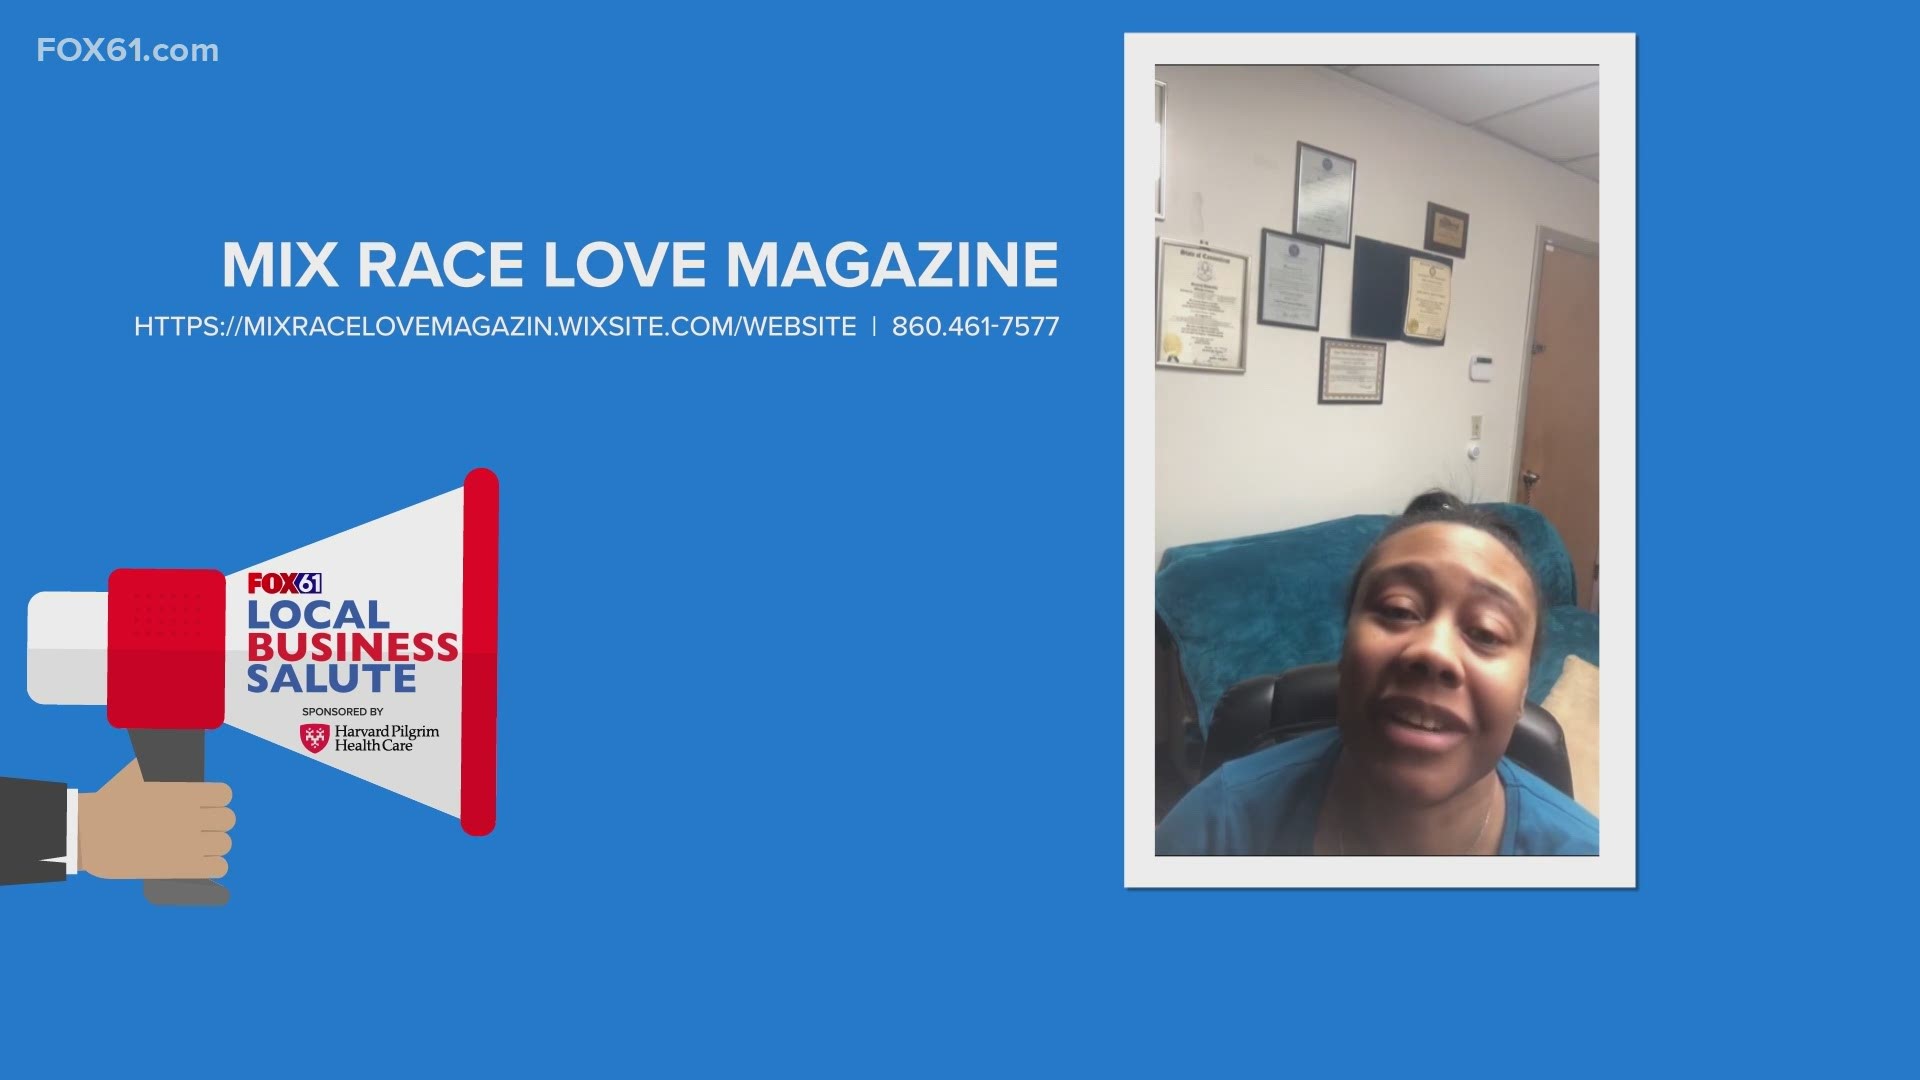 Mix Race Love magazine believes every writer has a story to tell and that story deserves to be told